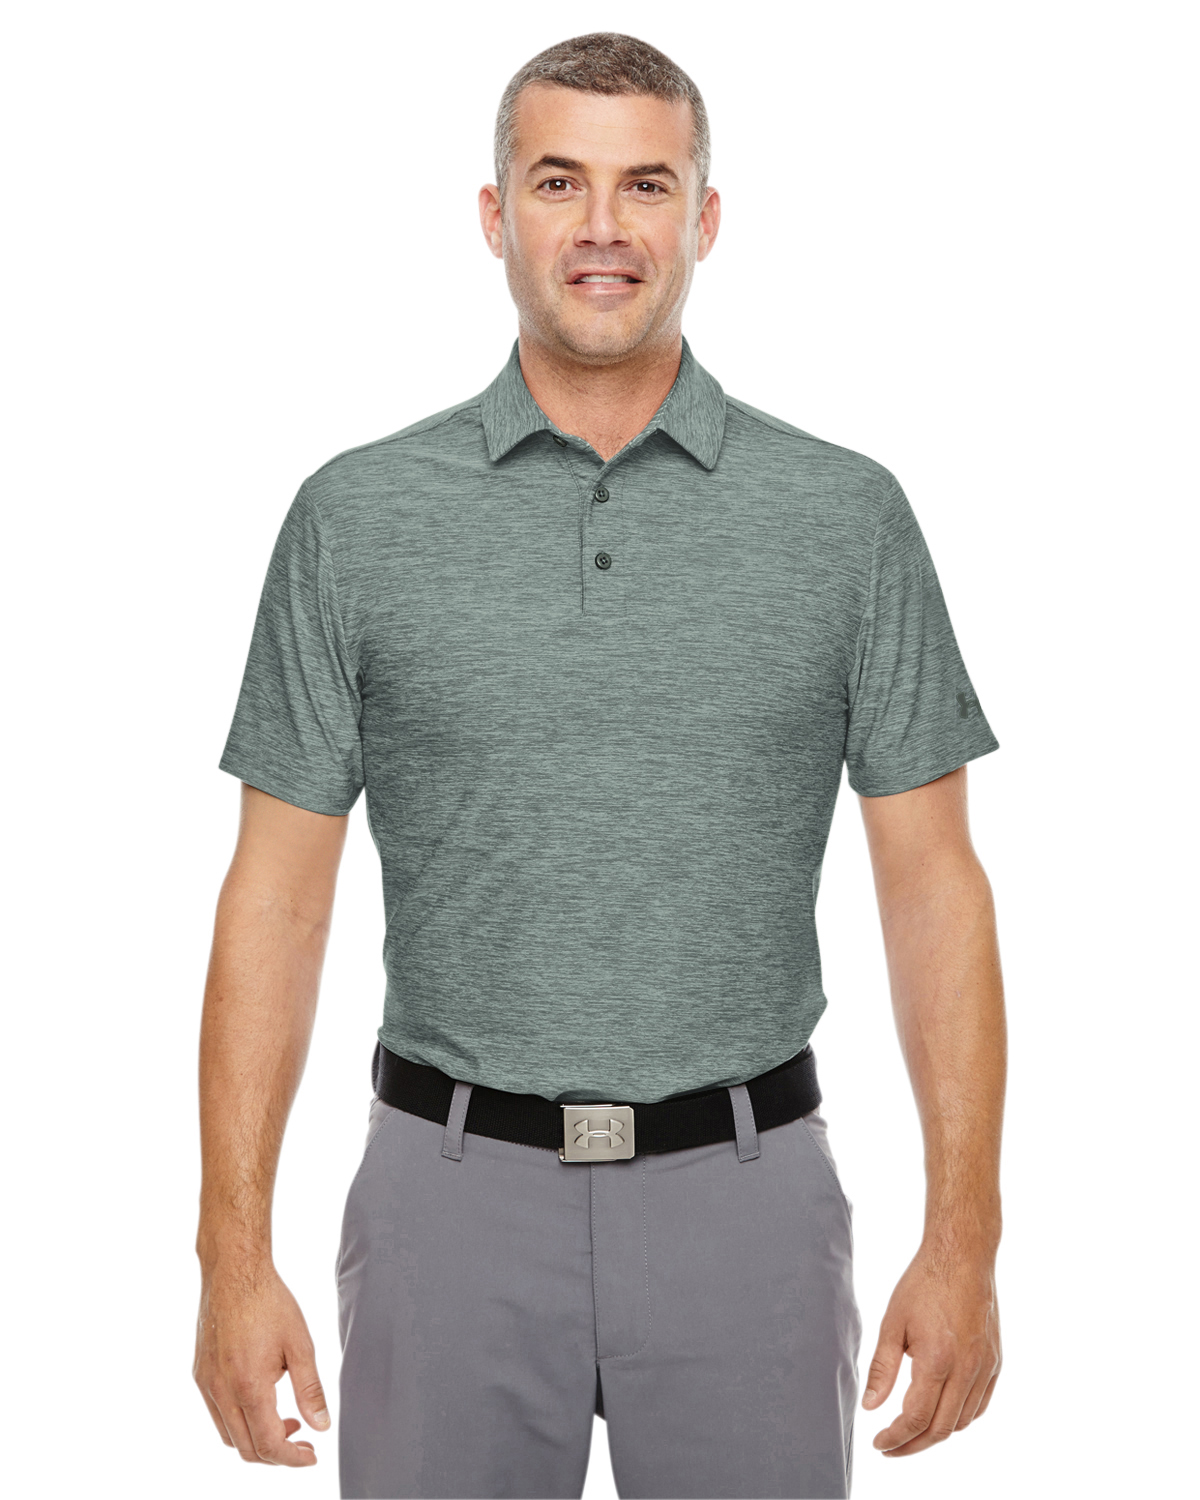 under armour playoff polo shirt